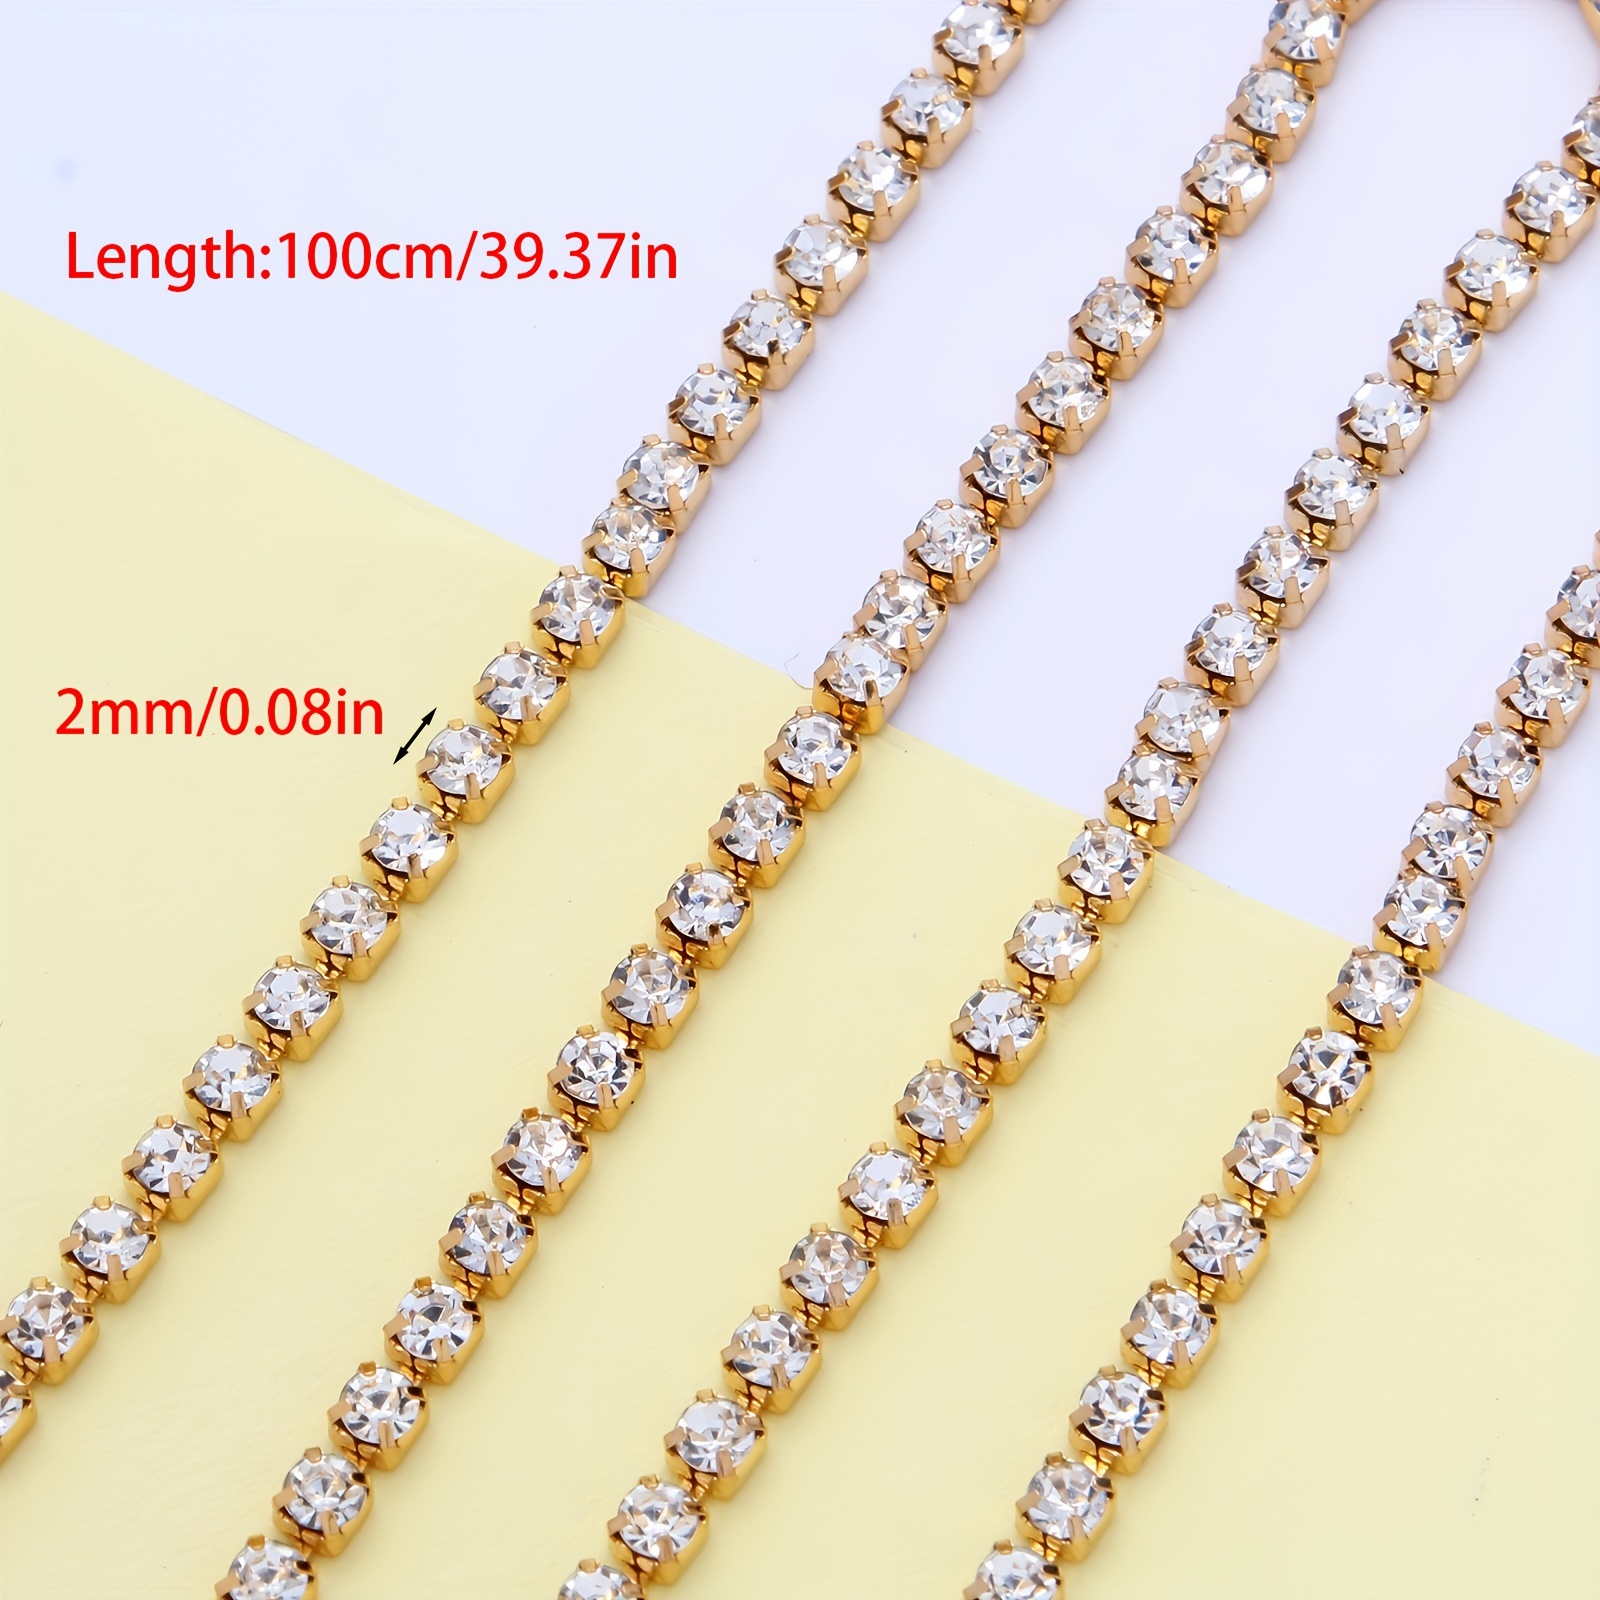 1 Roll 450cm Sparkly Rhinestone Chain For Diy Jewelry Making, Nail